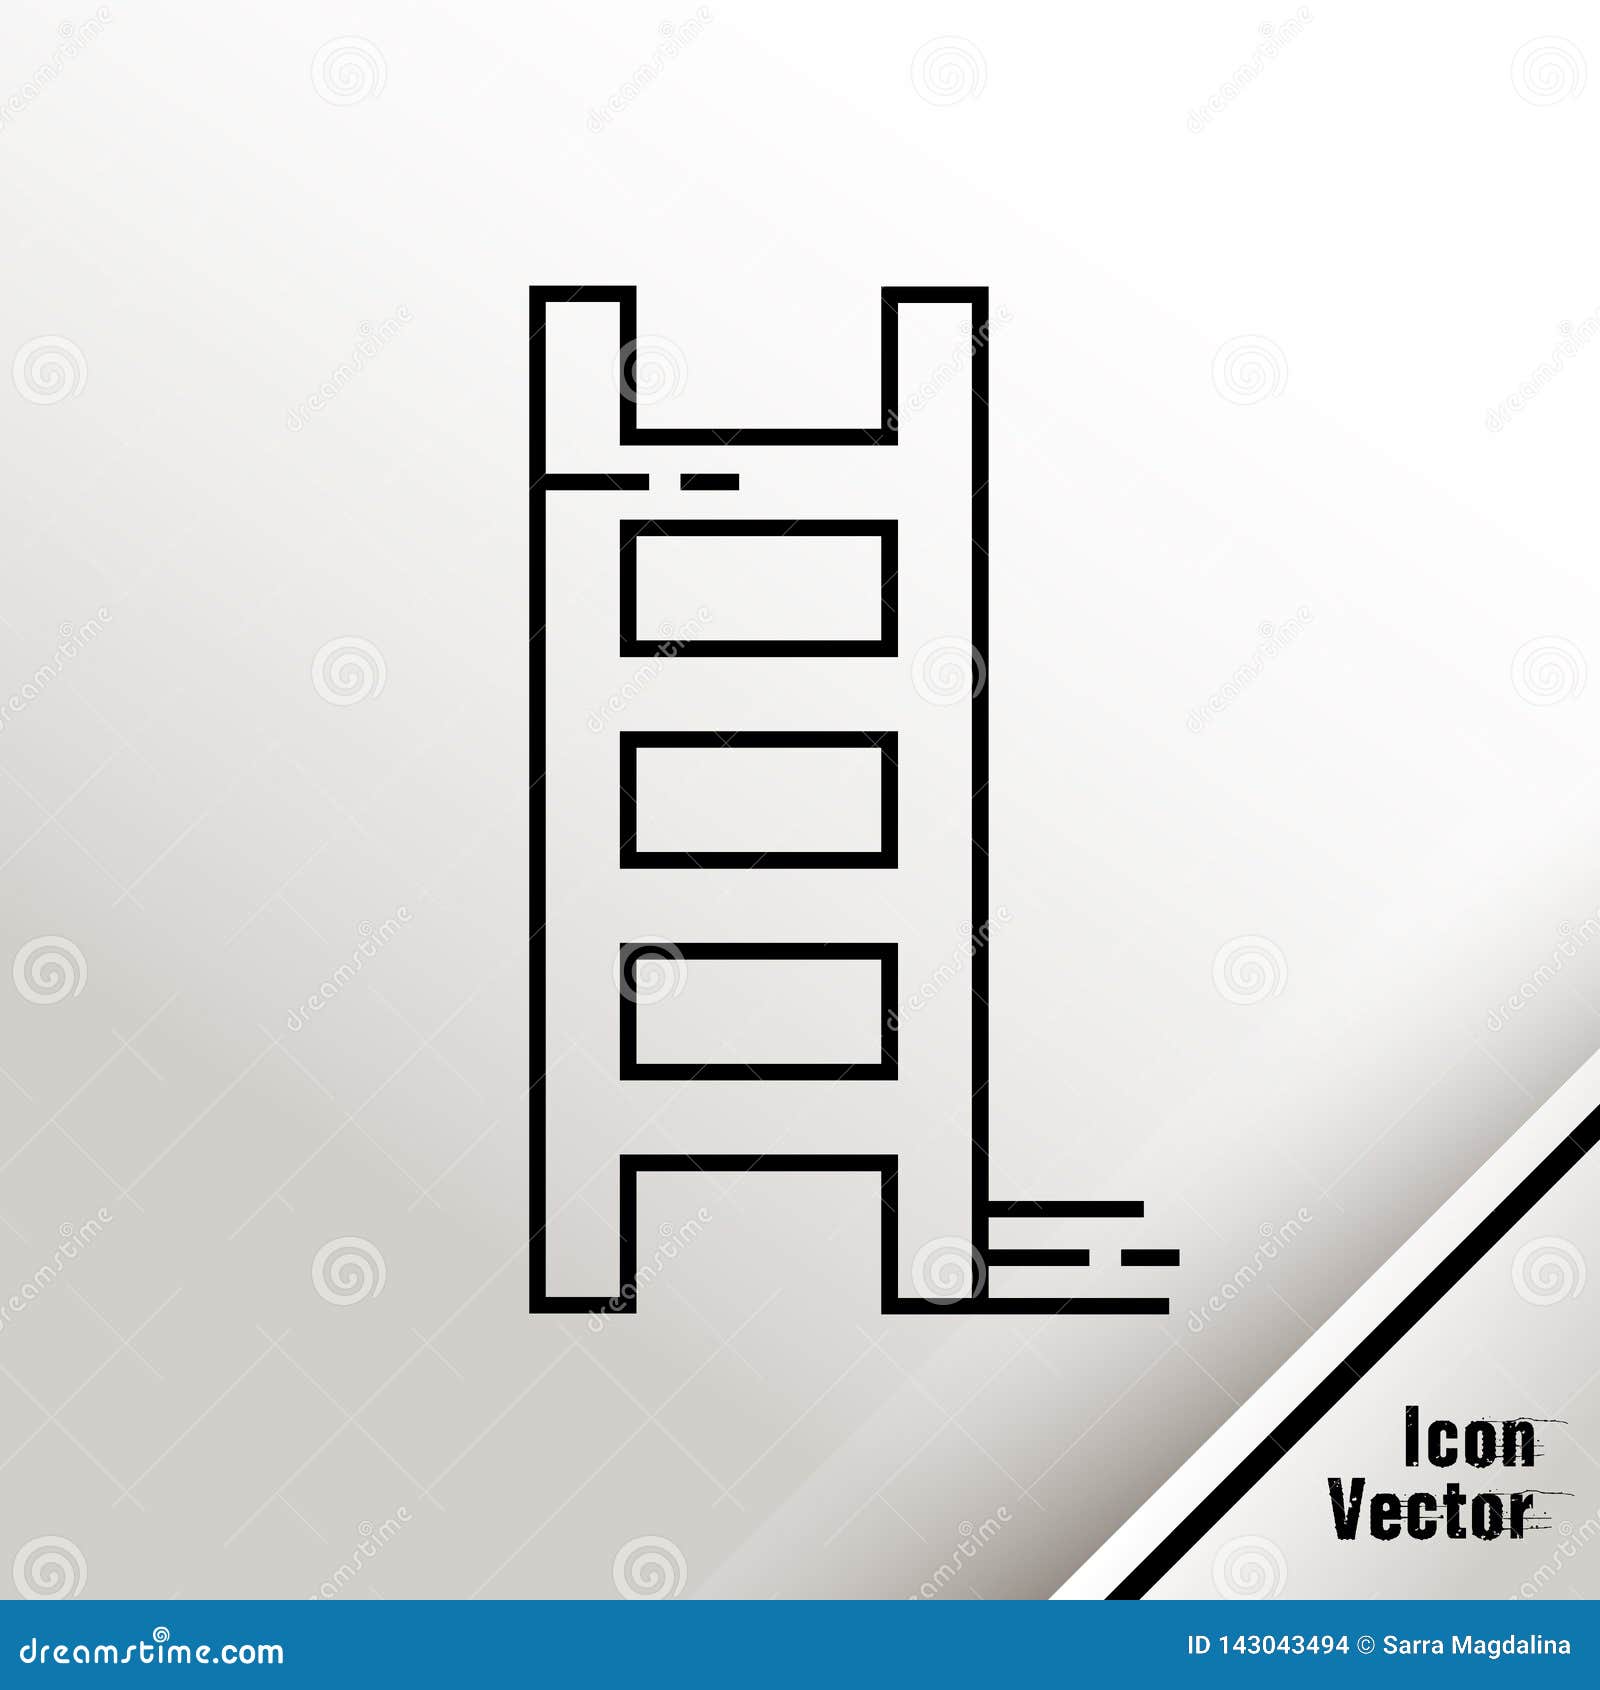 Ladder Outlined Vector Icon Illustration Isolated On White Background. Stock Vector